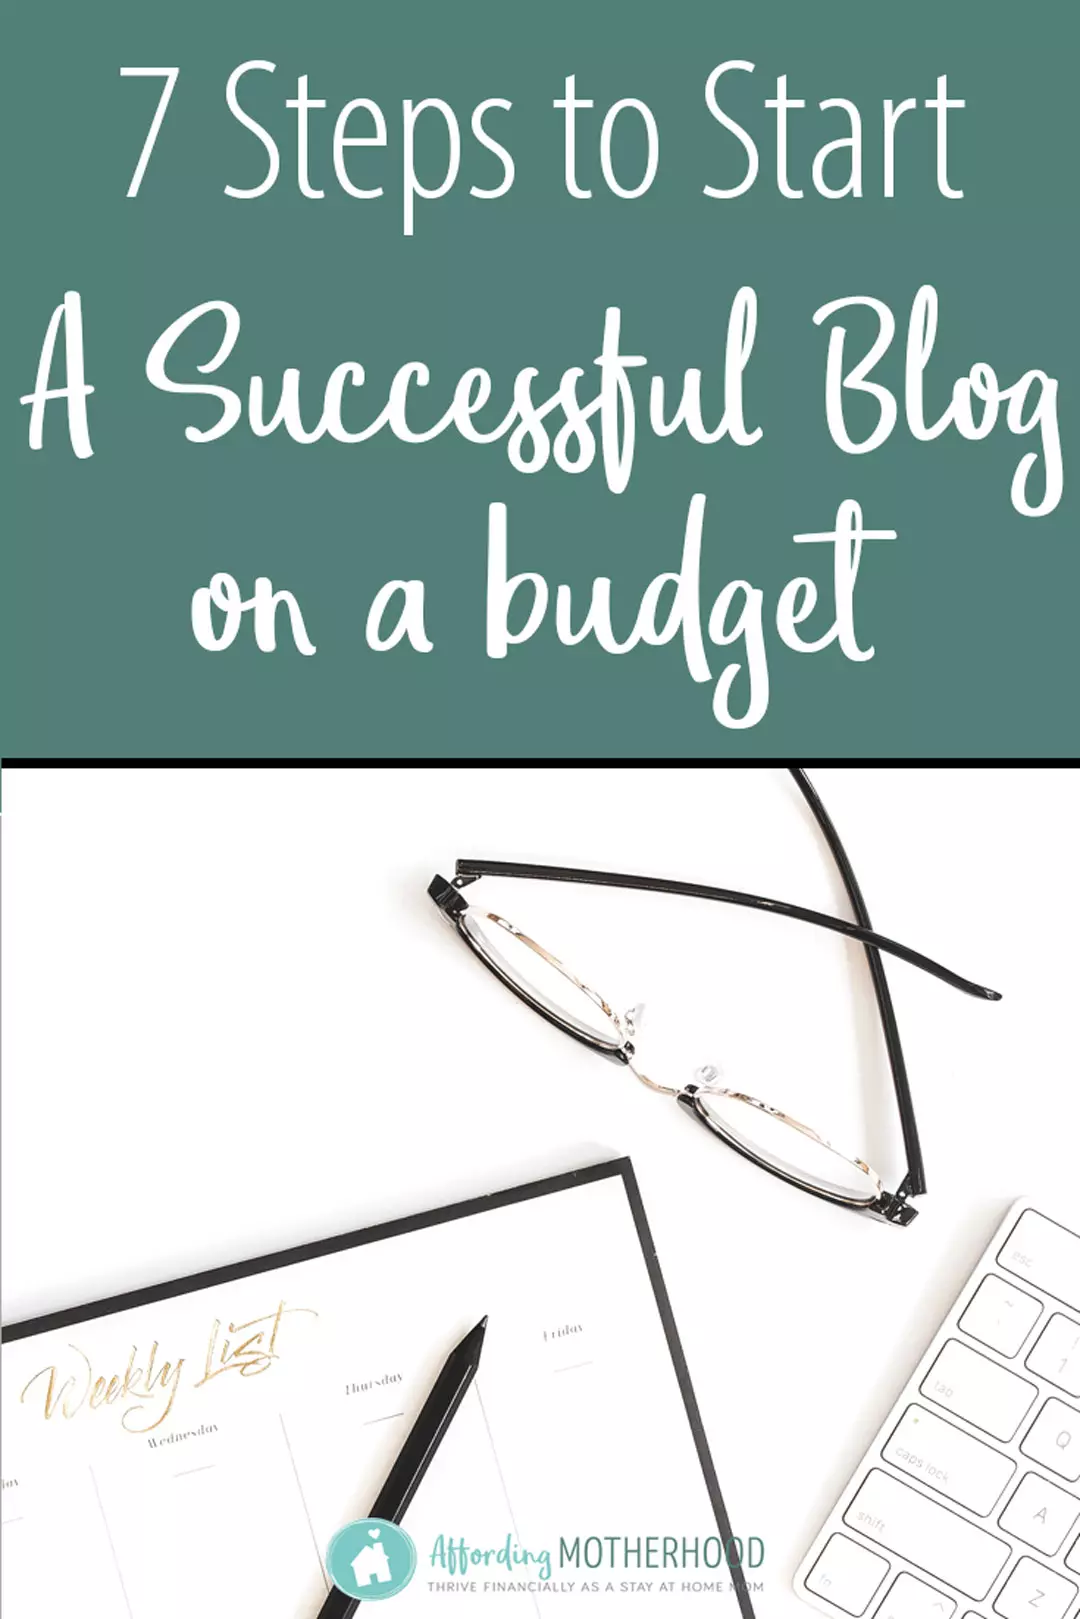 How To !   Start A Successful Blog Advice From A Full Time Blogger - a guide for b!   usy moms who want to earn a part time or full time income